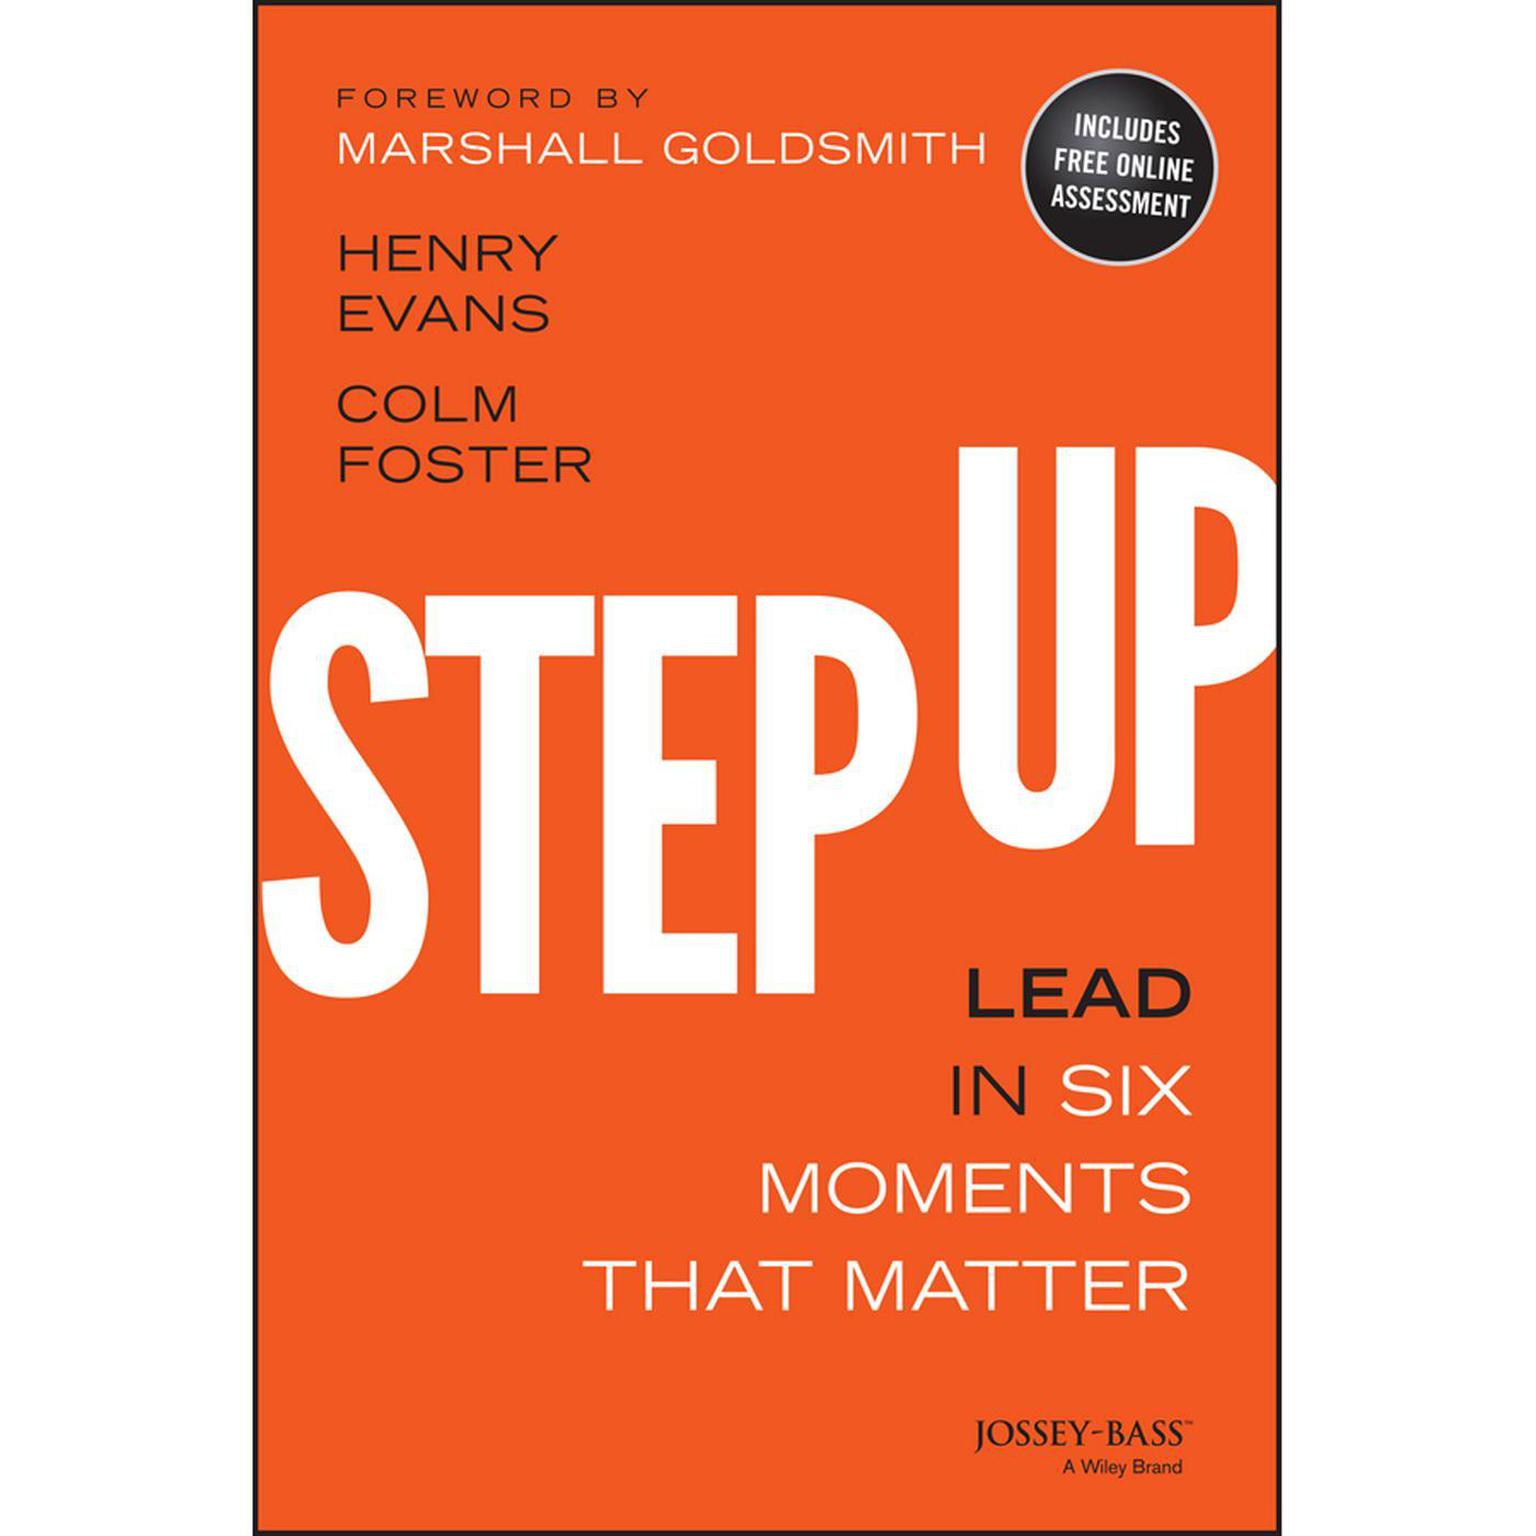 Step Up: Lead in Six Moments that Matter Audiobook, by Colm Foster